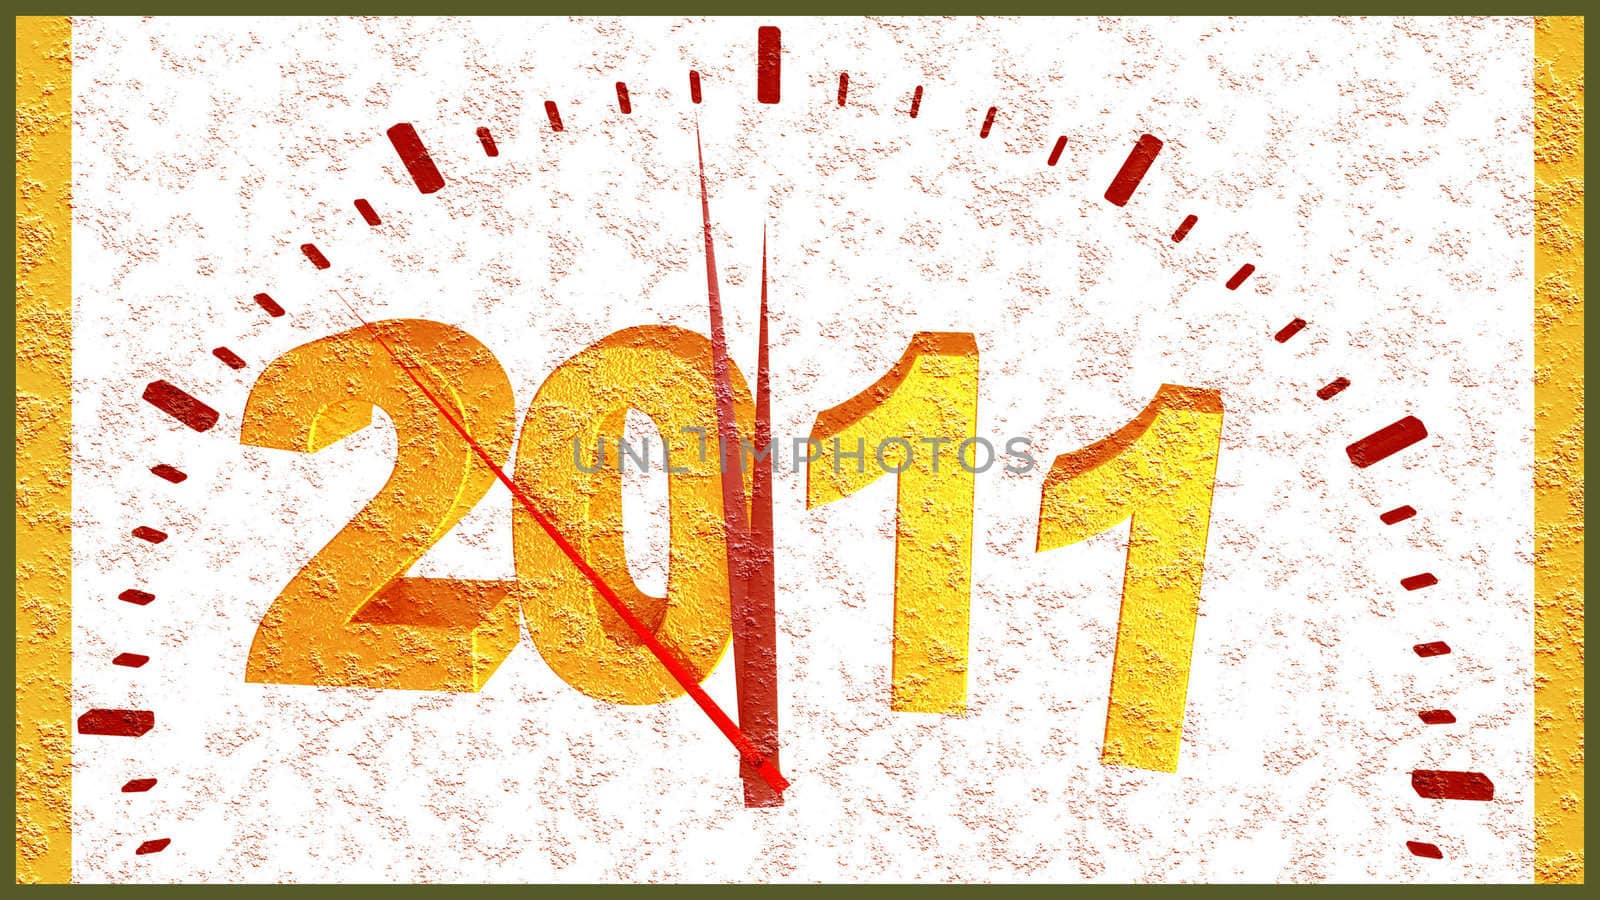 Clock -showing five minutes to twelve, and 2011 New Year!